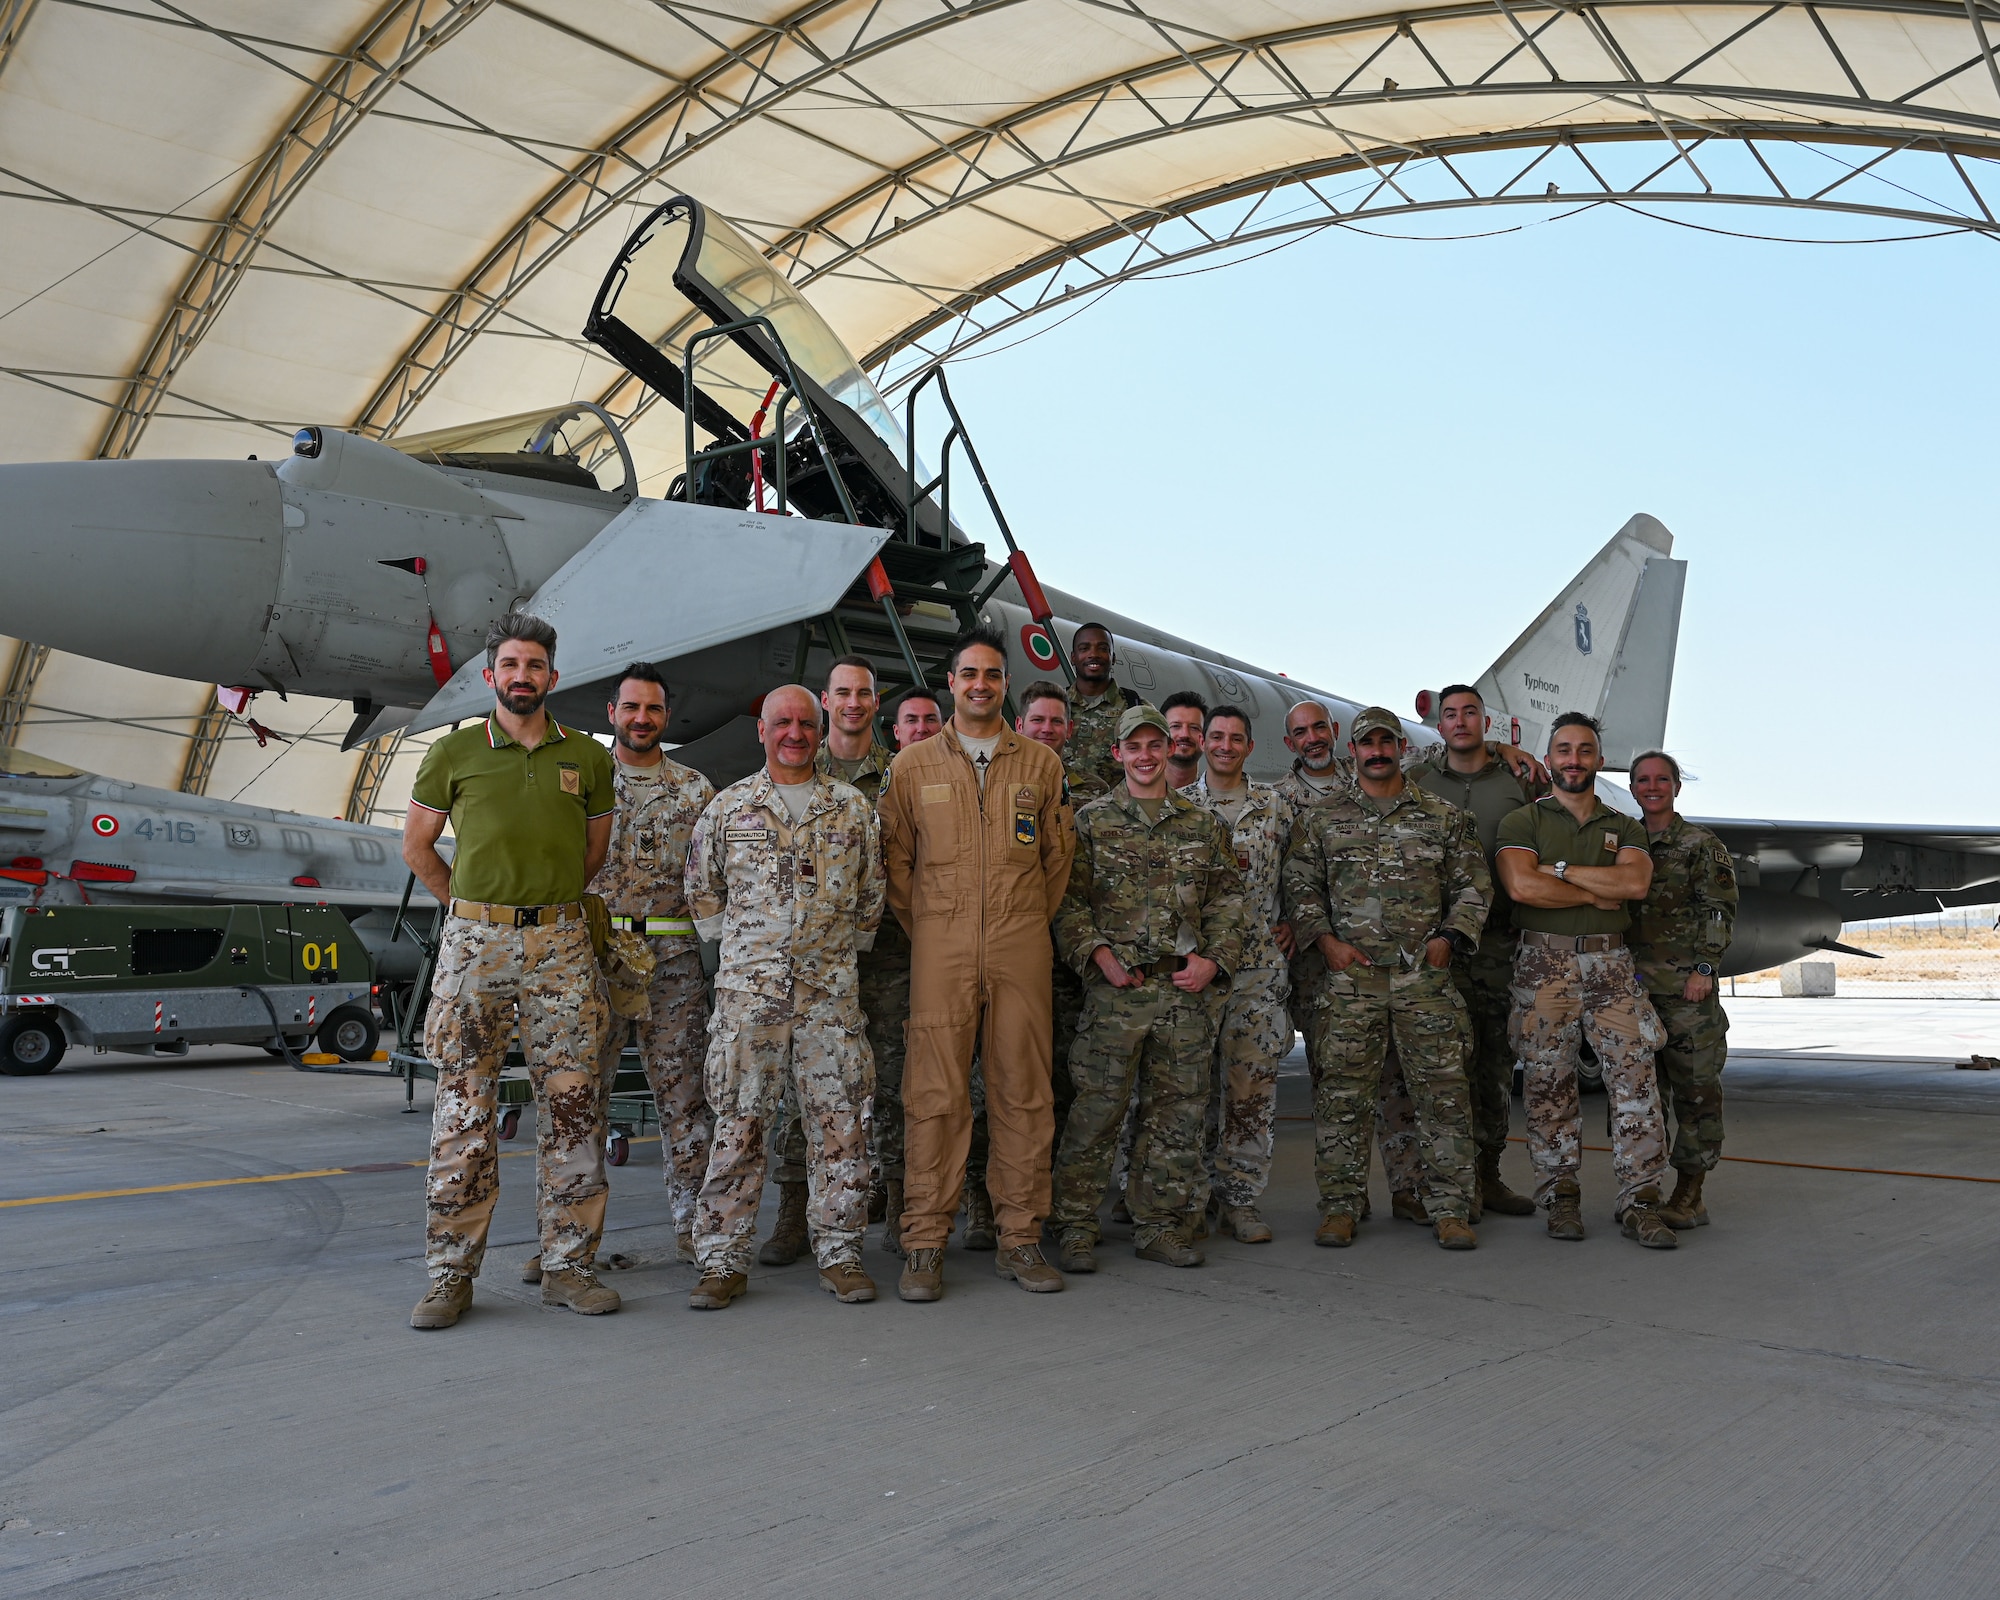 Service members of the U.S. Air Force, the U.S. Army and the Italian Air Force stand together in front of an Italian Eurofighter Typhoon after a tour of the aircraft at Ali Al Salem Air Base, Kuwait, June 22, 2023. Sharing our knowledge and capabilities with one another is critical to increasing the interoperability of our forces, and projecting decisive coalition combat power. (U.S. Air Force photo by Staff Sgt. Breanna Diaz)